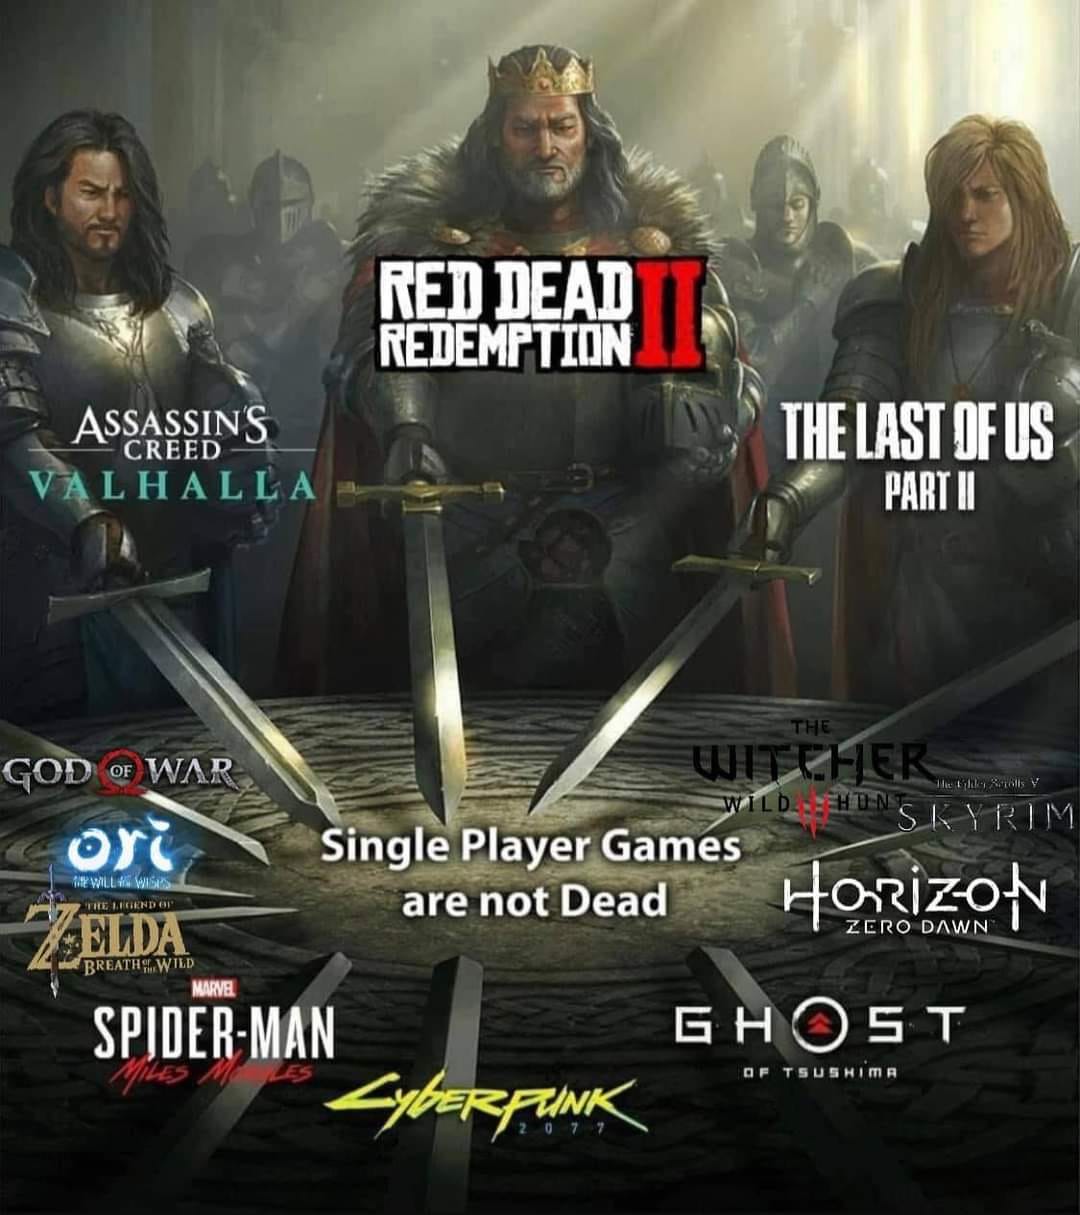 sword guys meme - Red Dead Redemption Assassin'S Valhalla Creed The Last Of Us Part Ii The Hv Wild Hun The Will Wisas God Of War Witther Skyrim ori Single Player Games are not Dead Zelda Horizon SpiderMan Ghost Cyberfunk Breath Wild Marve Of Tsushima